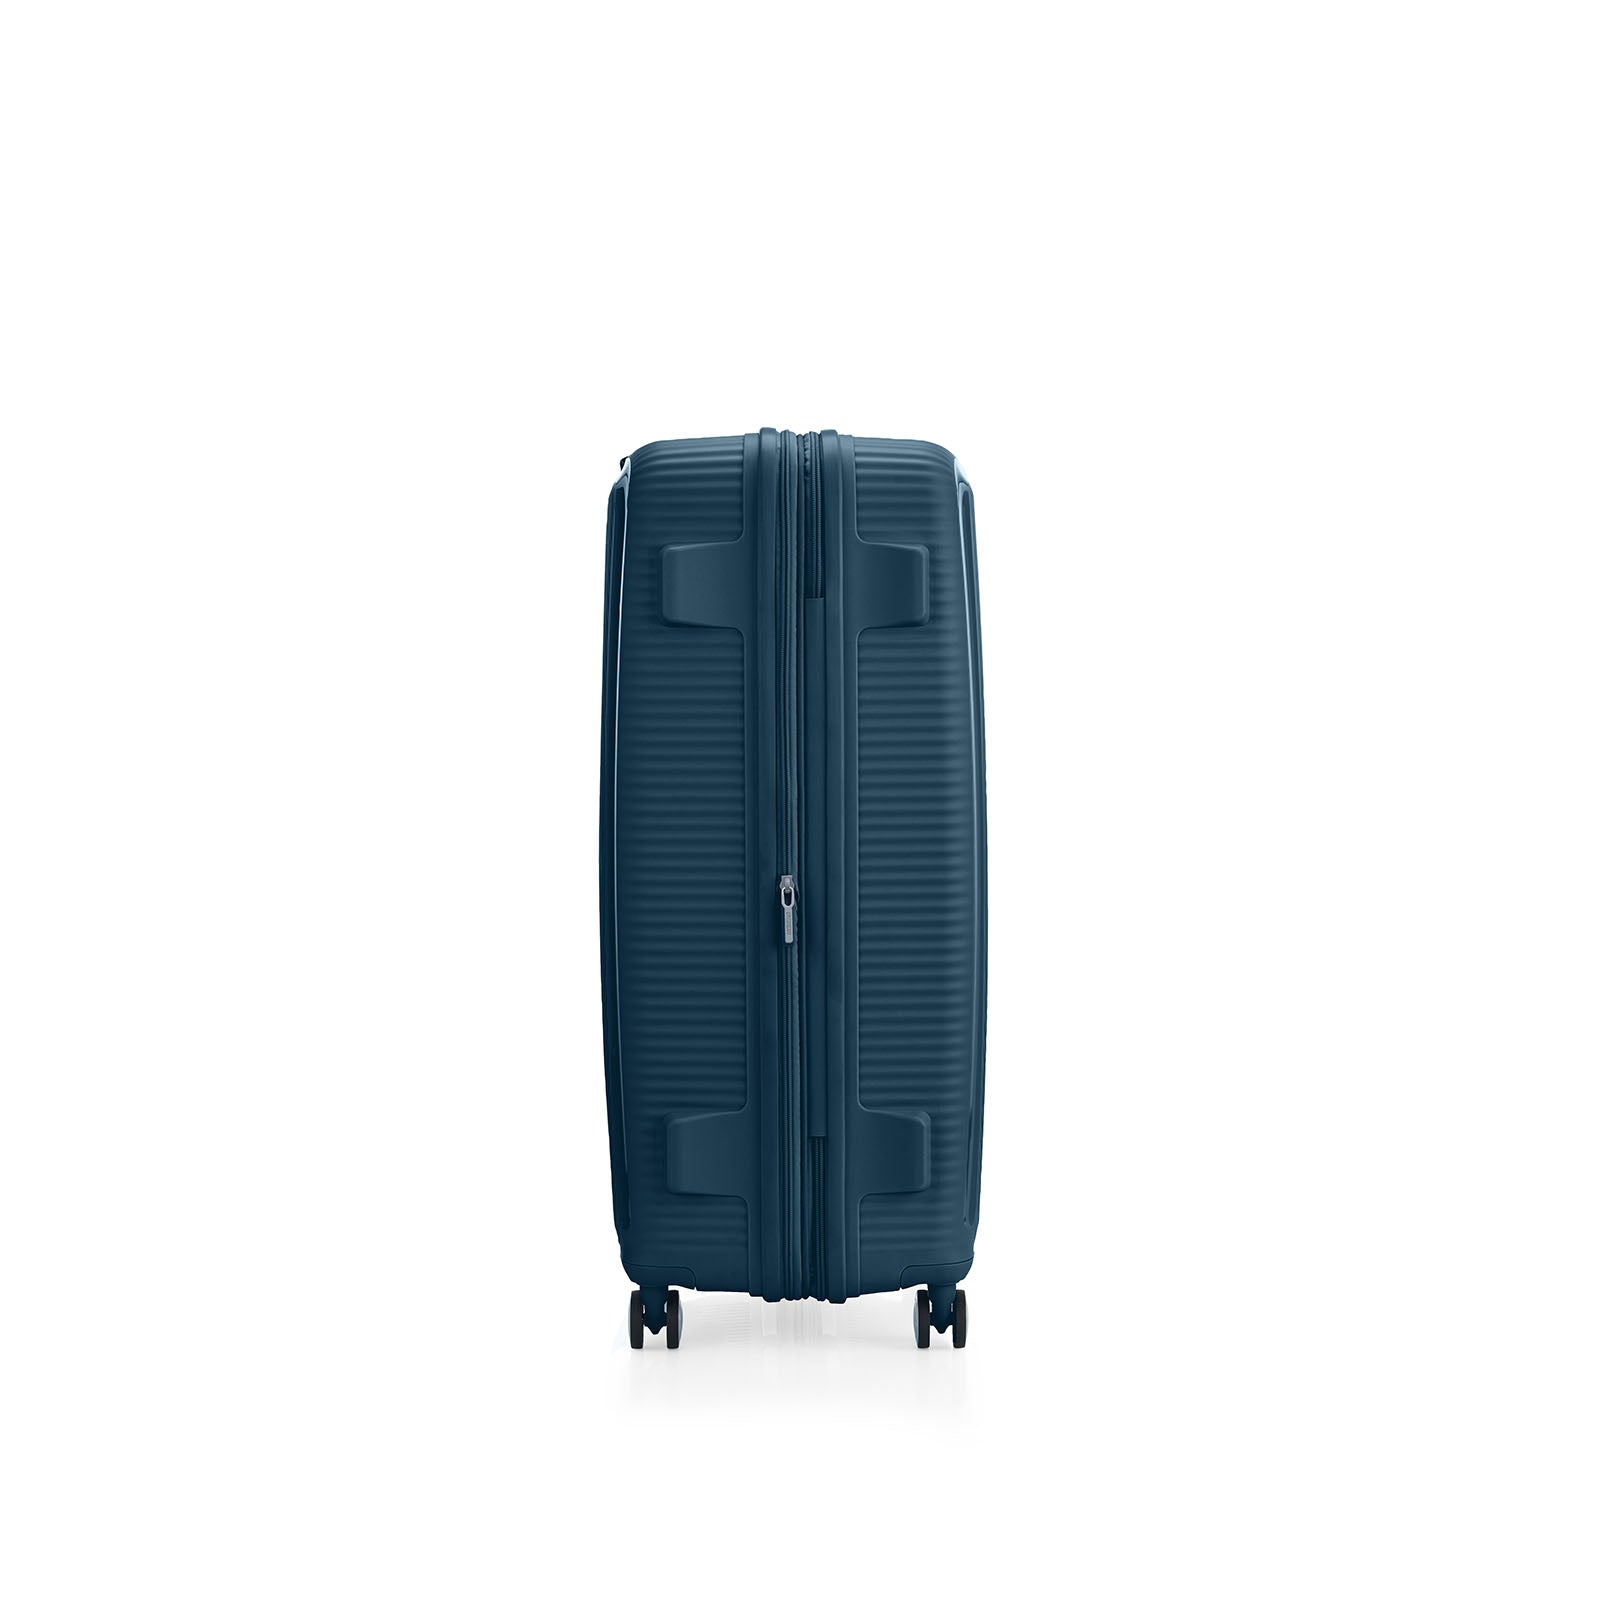 American-Tourister-Curio-2-80cm-Suitcase-Varisty-Green-Side